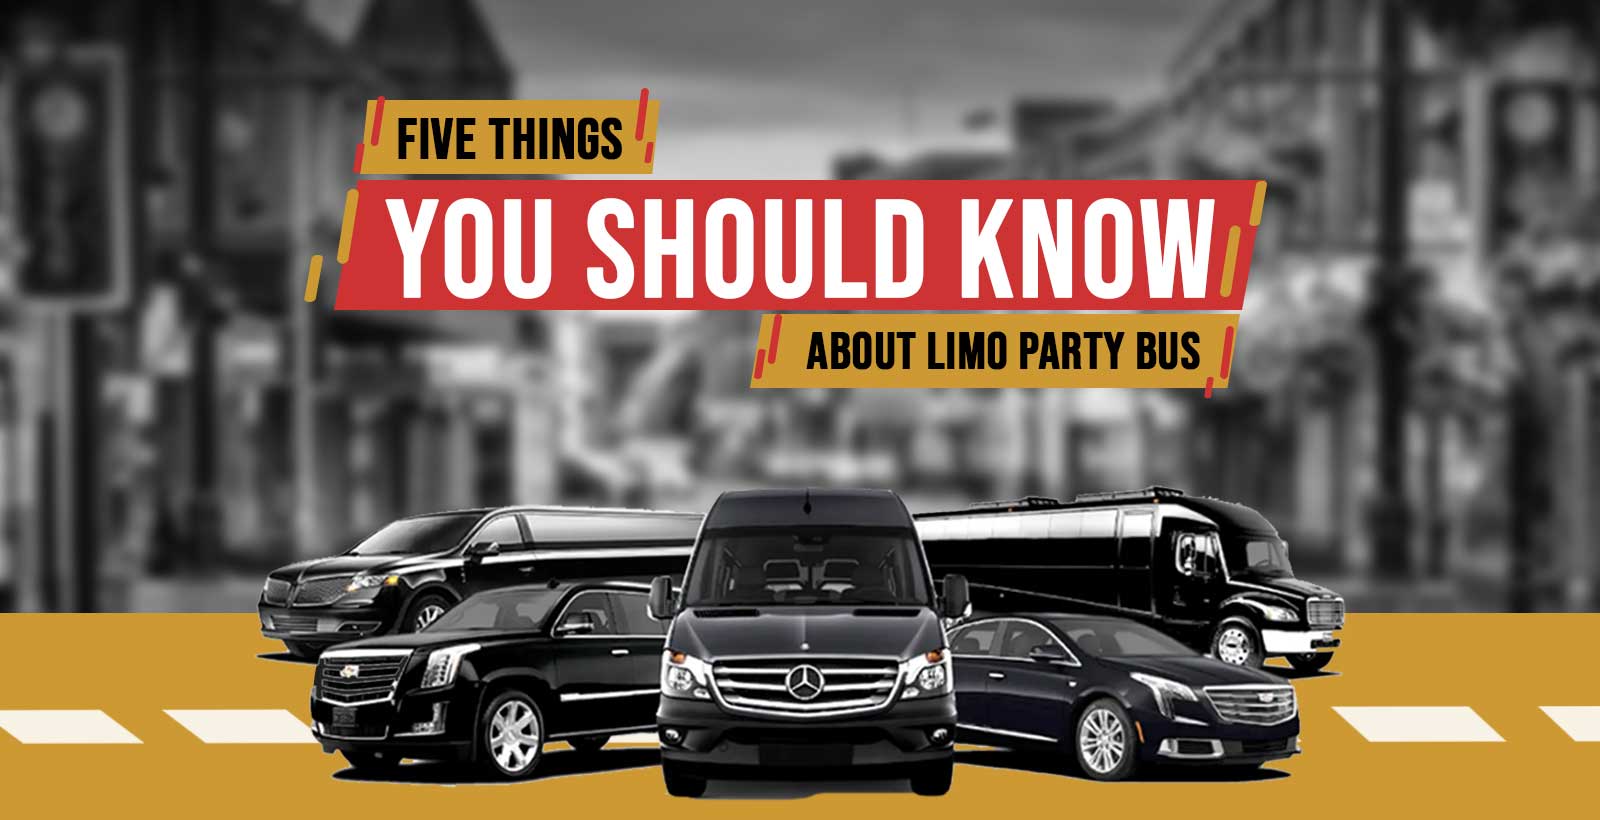 Limo Party Bus – 5 Things You Should Know